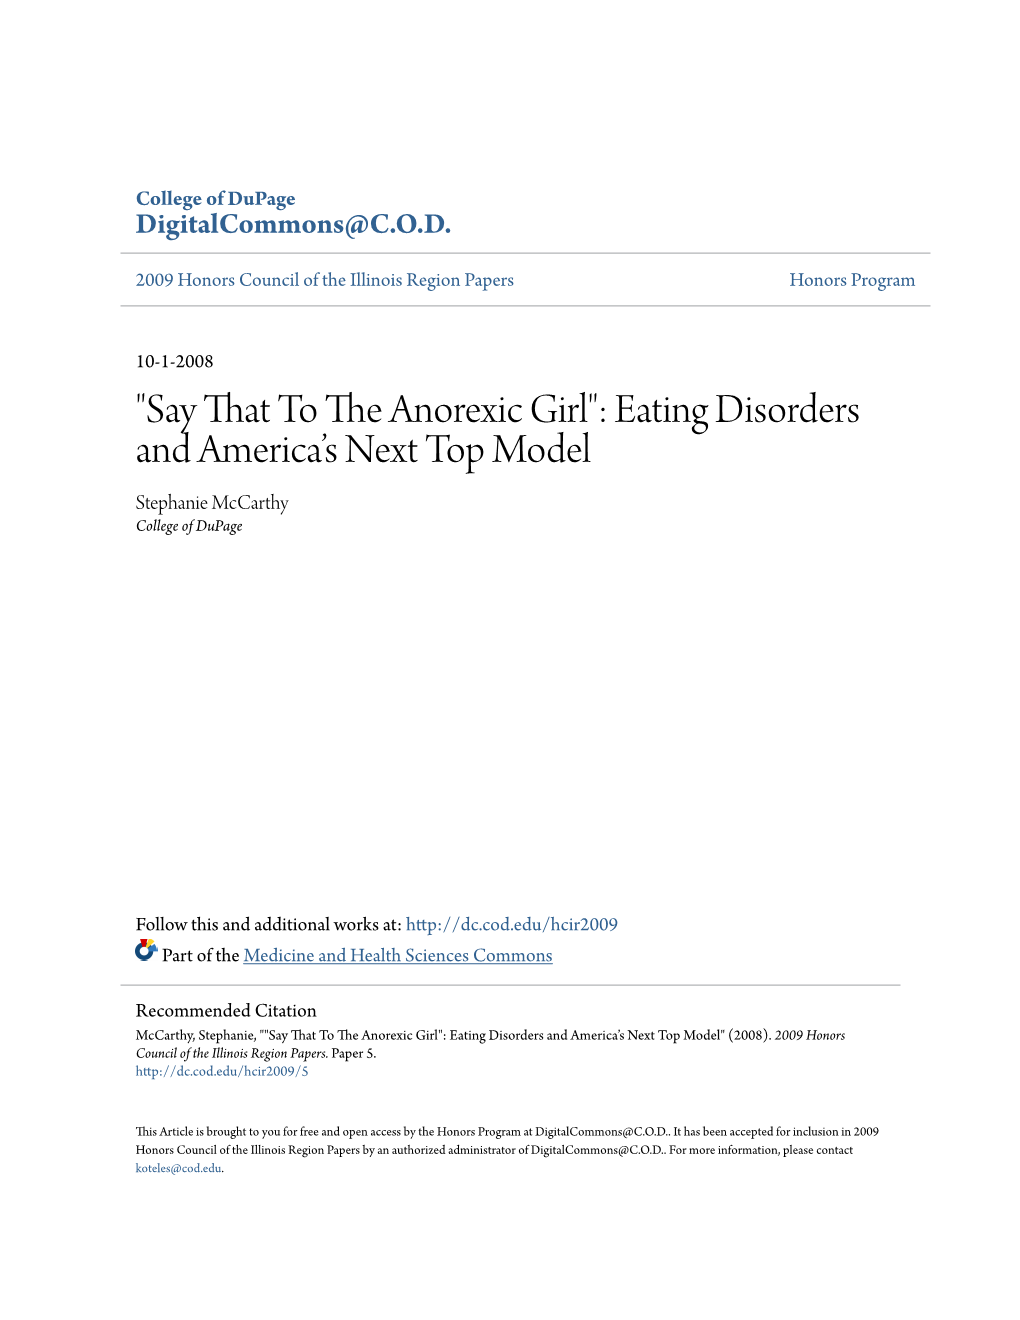 Eating Disorders and America's Next Top Model